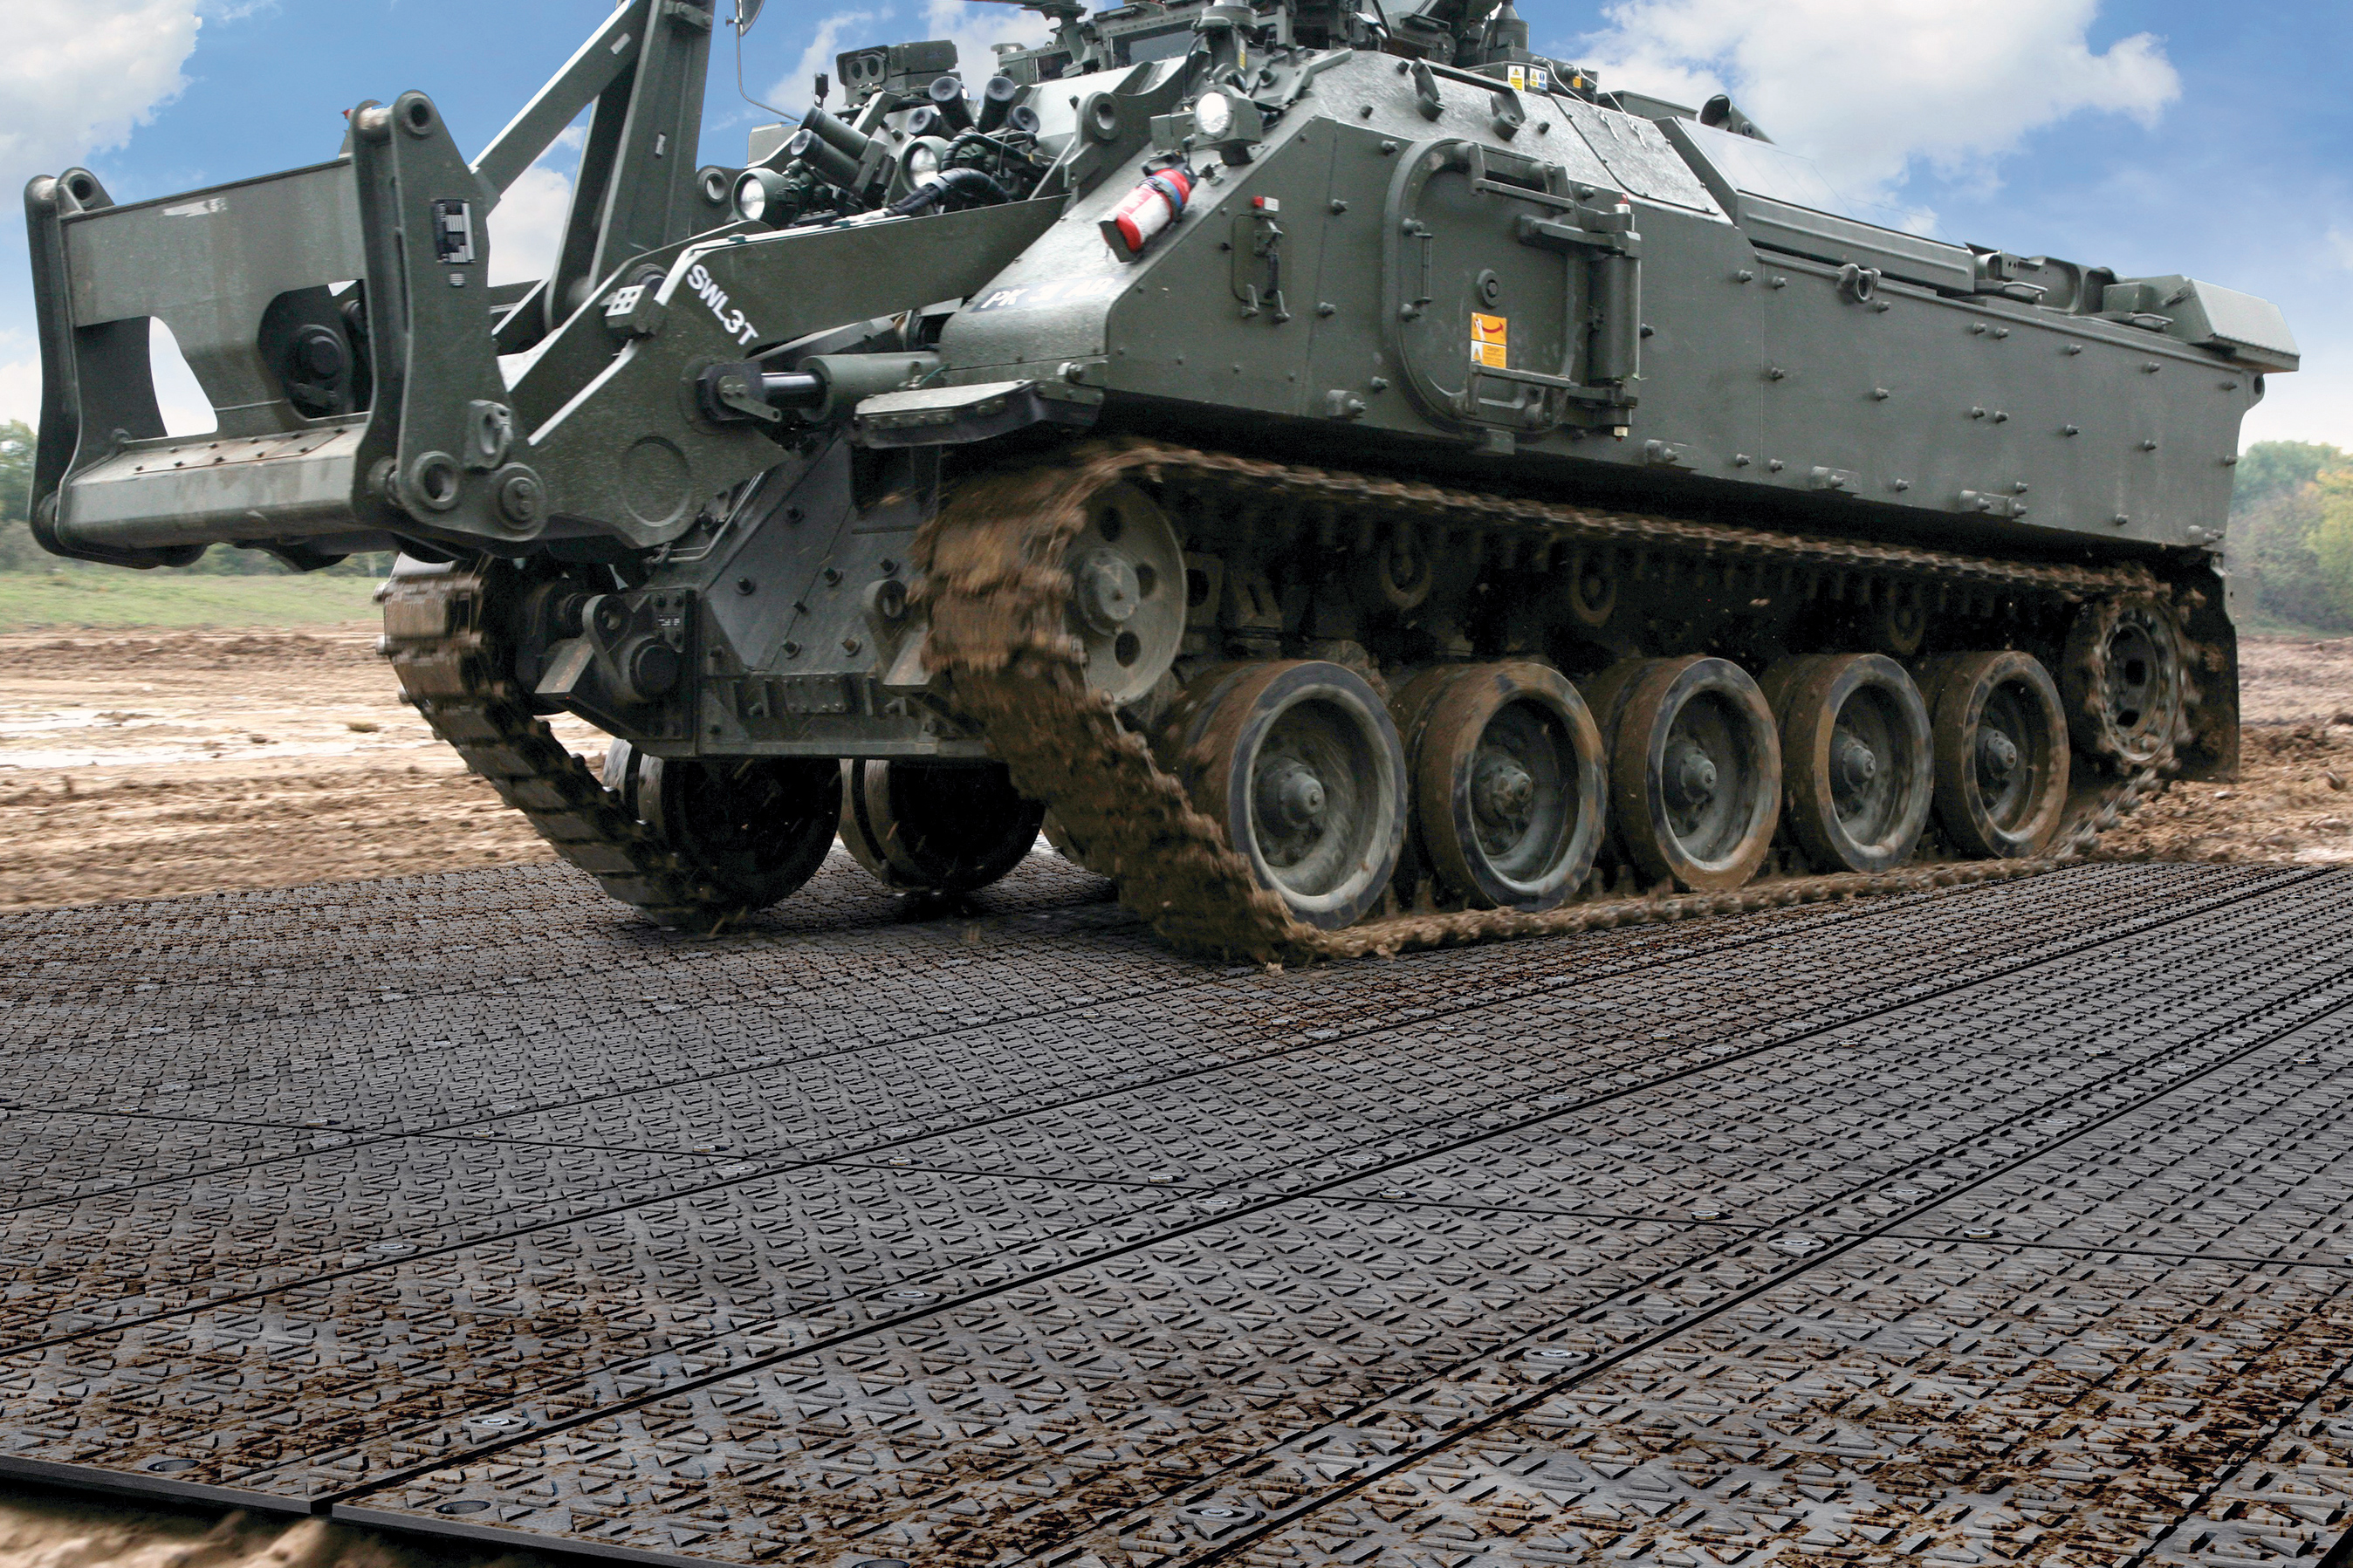 Ground mats for military use